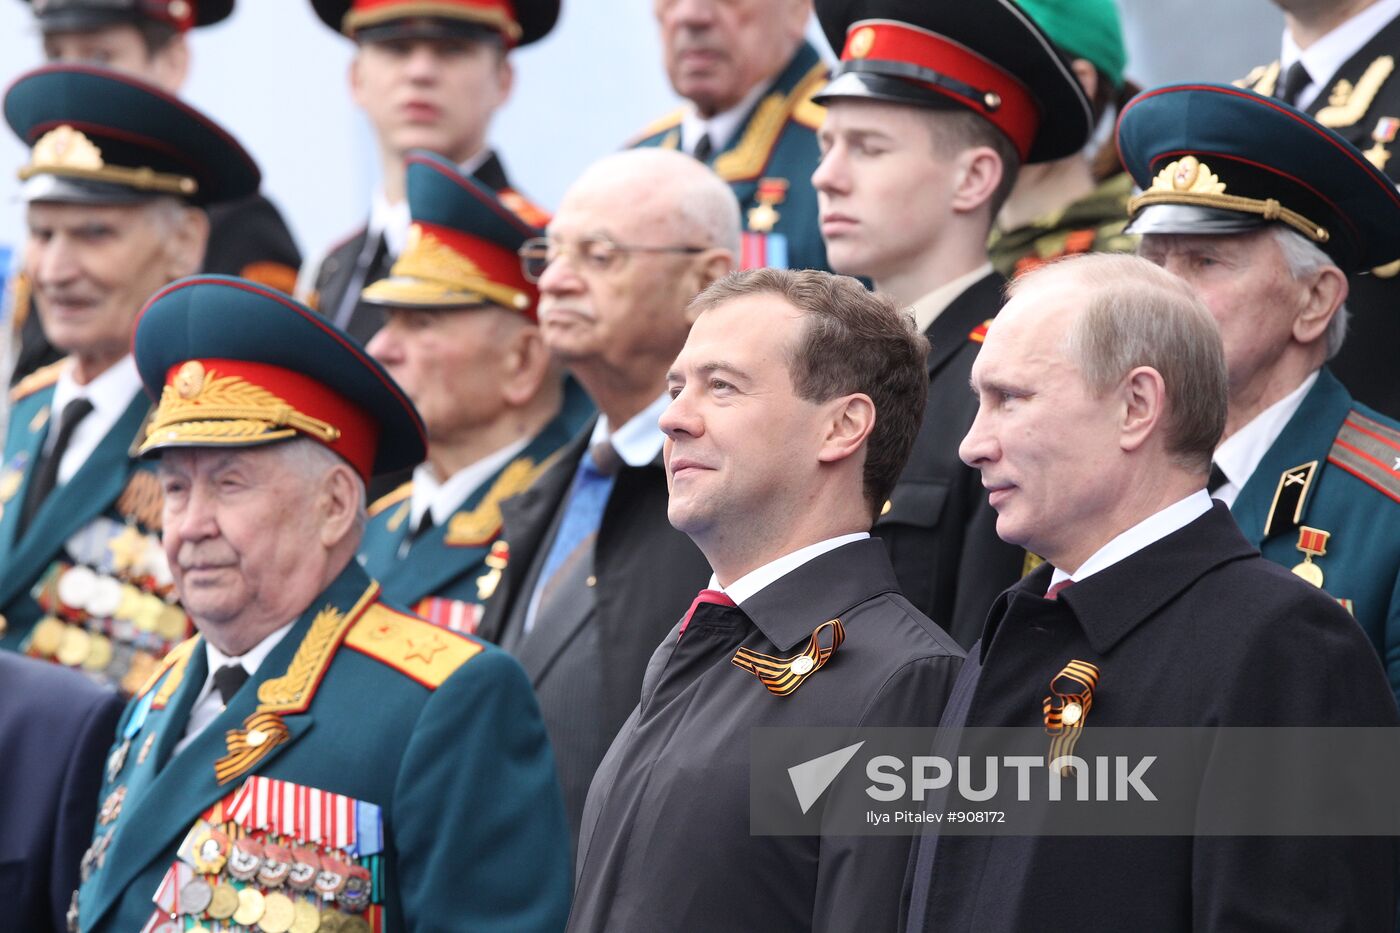 D. Medvedev and V. Putin attend Victory Parade, Red Square